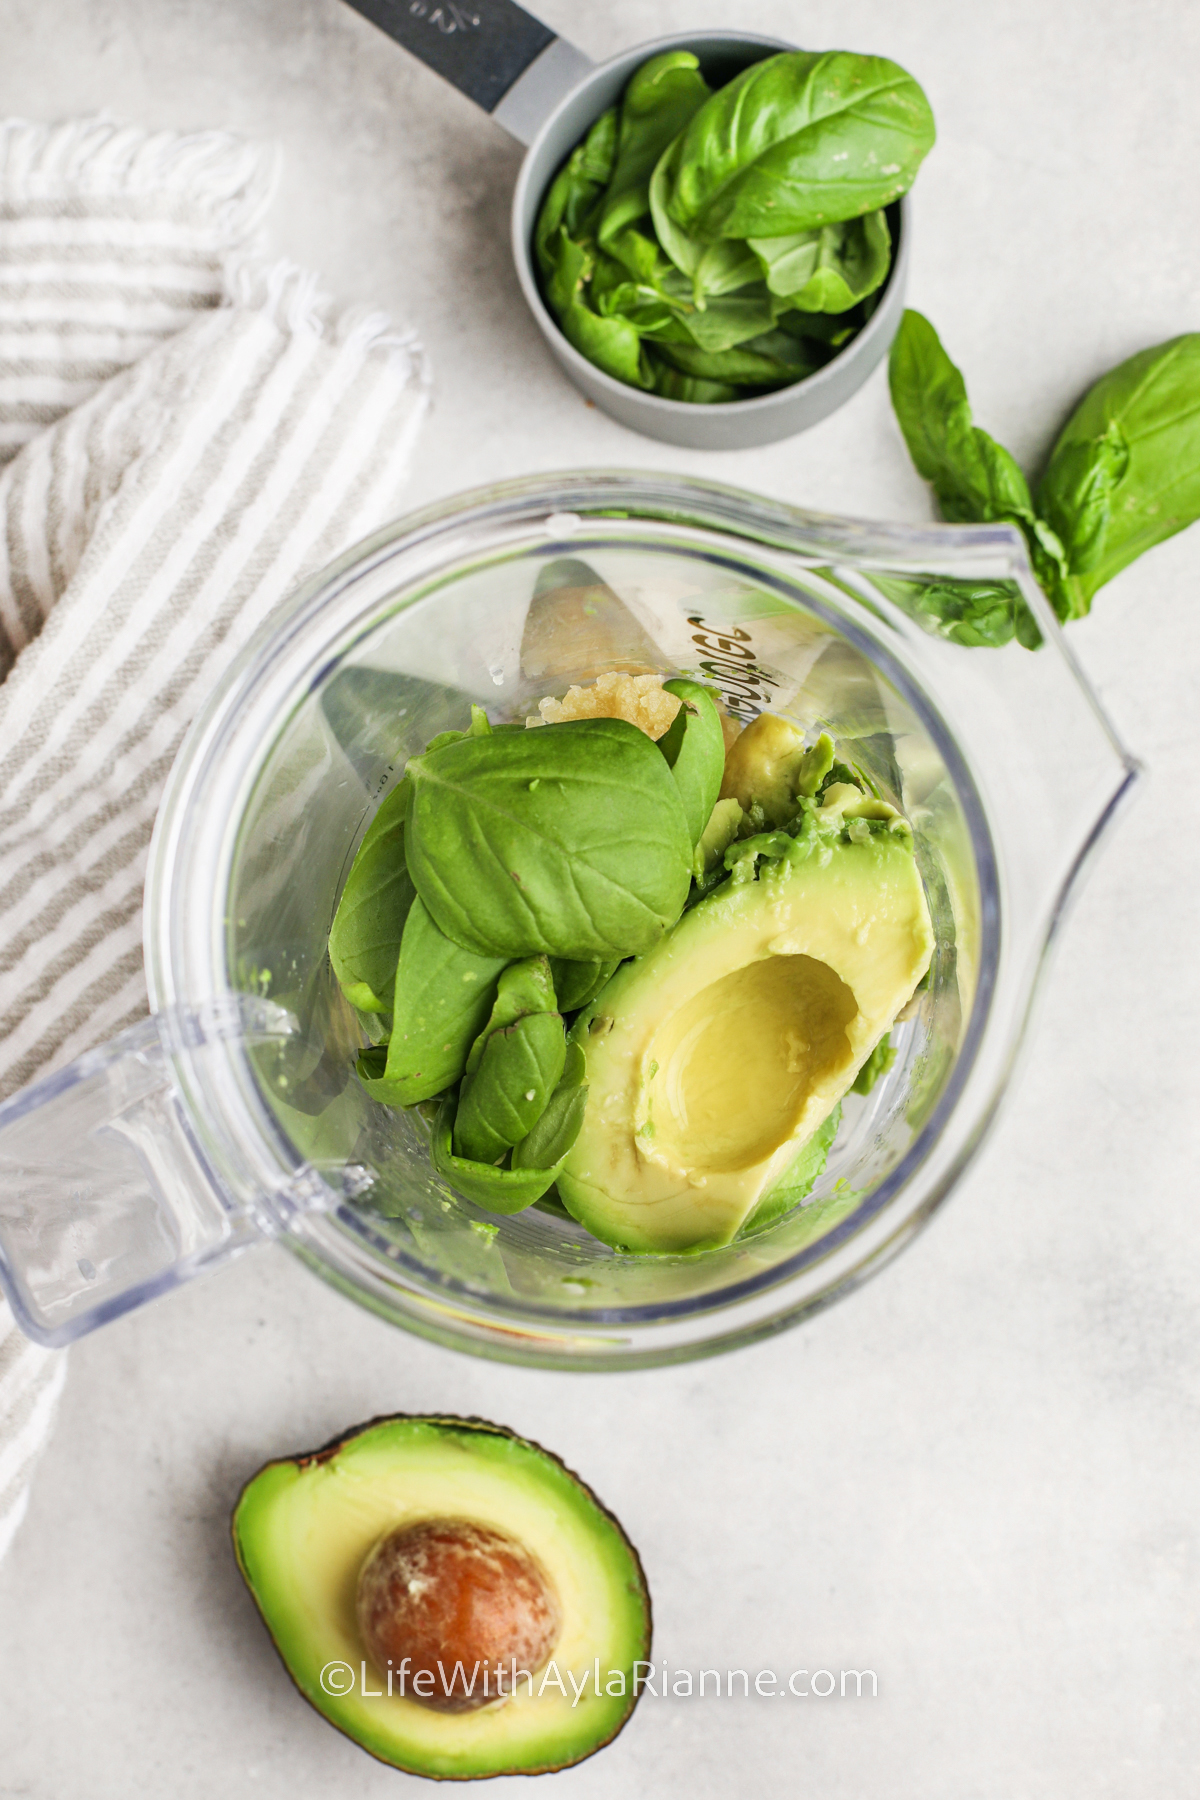 Ingredients to make the avocado sauce for past in a food processor